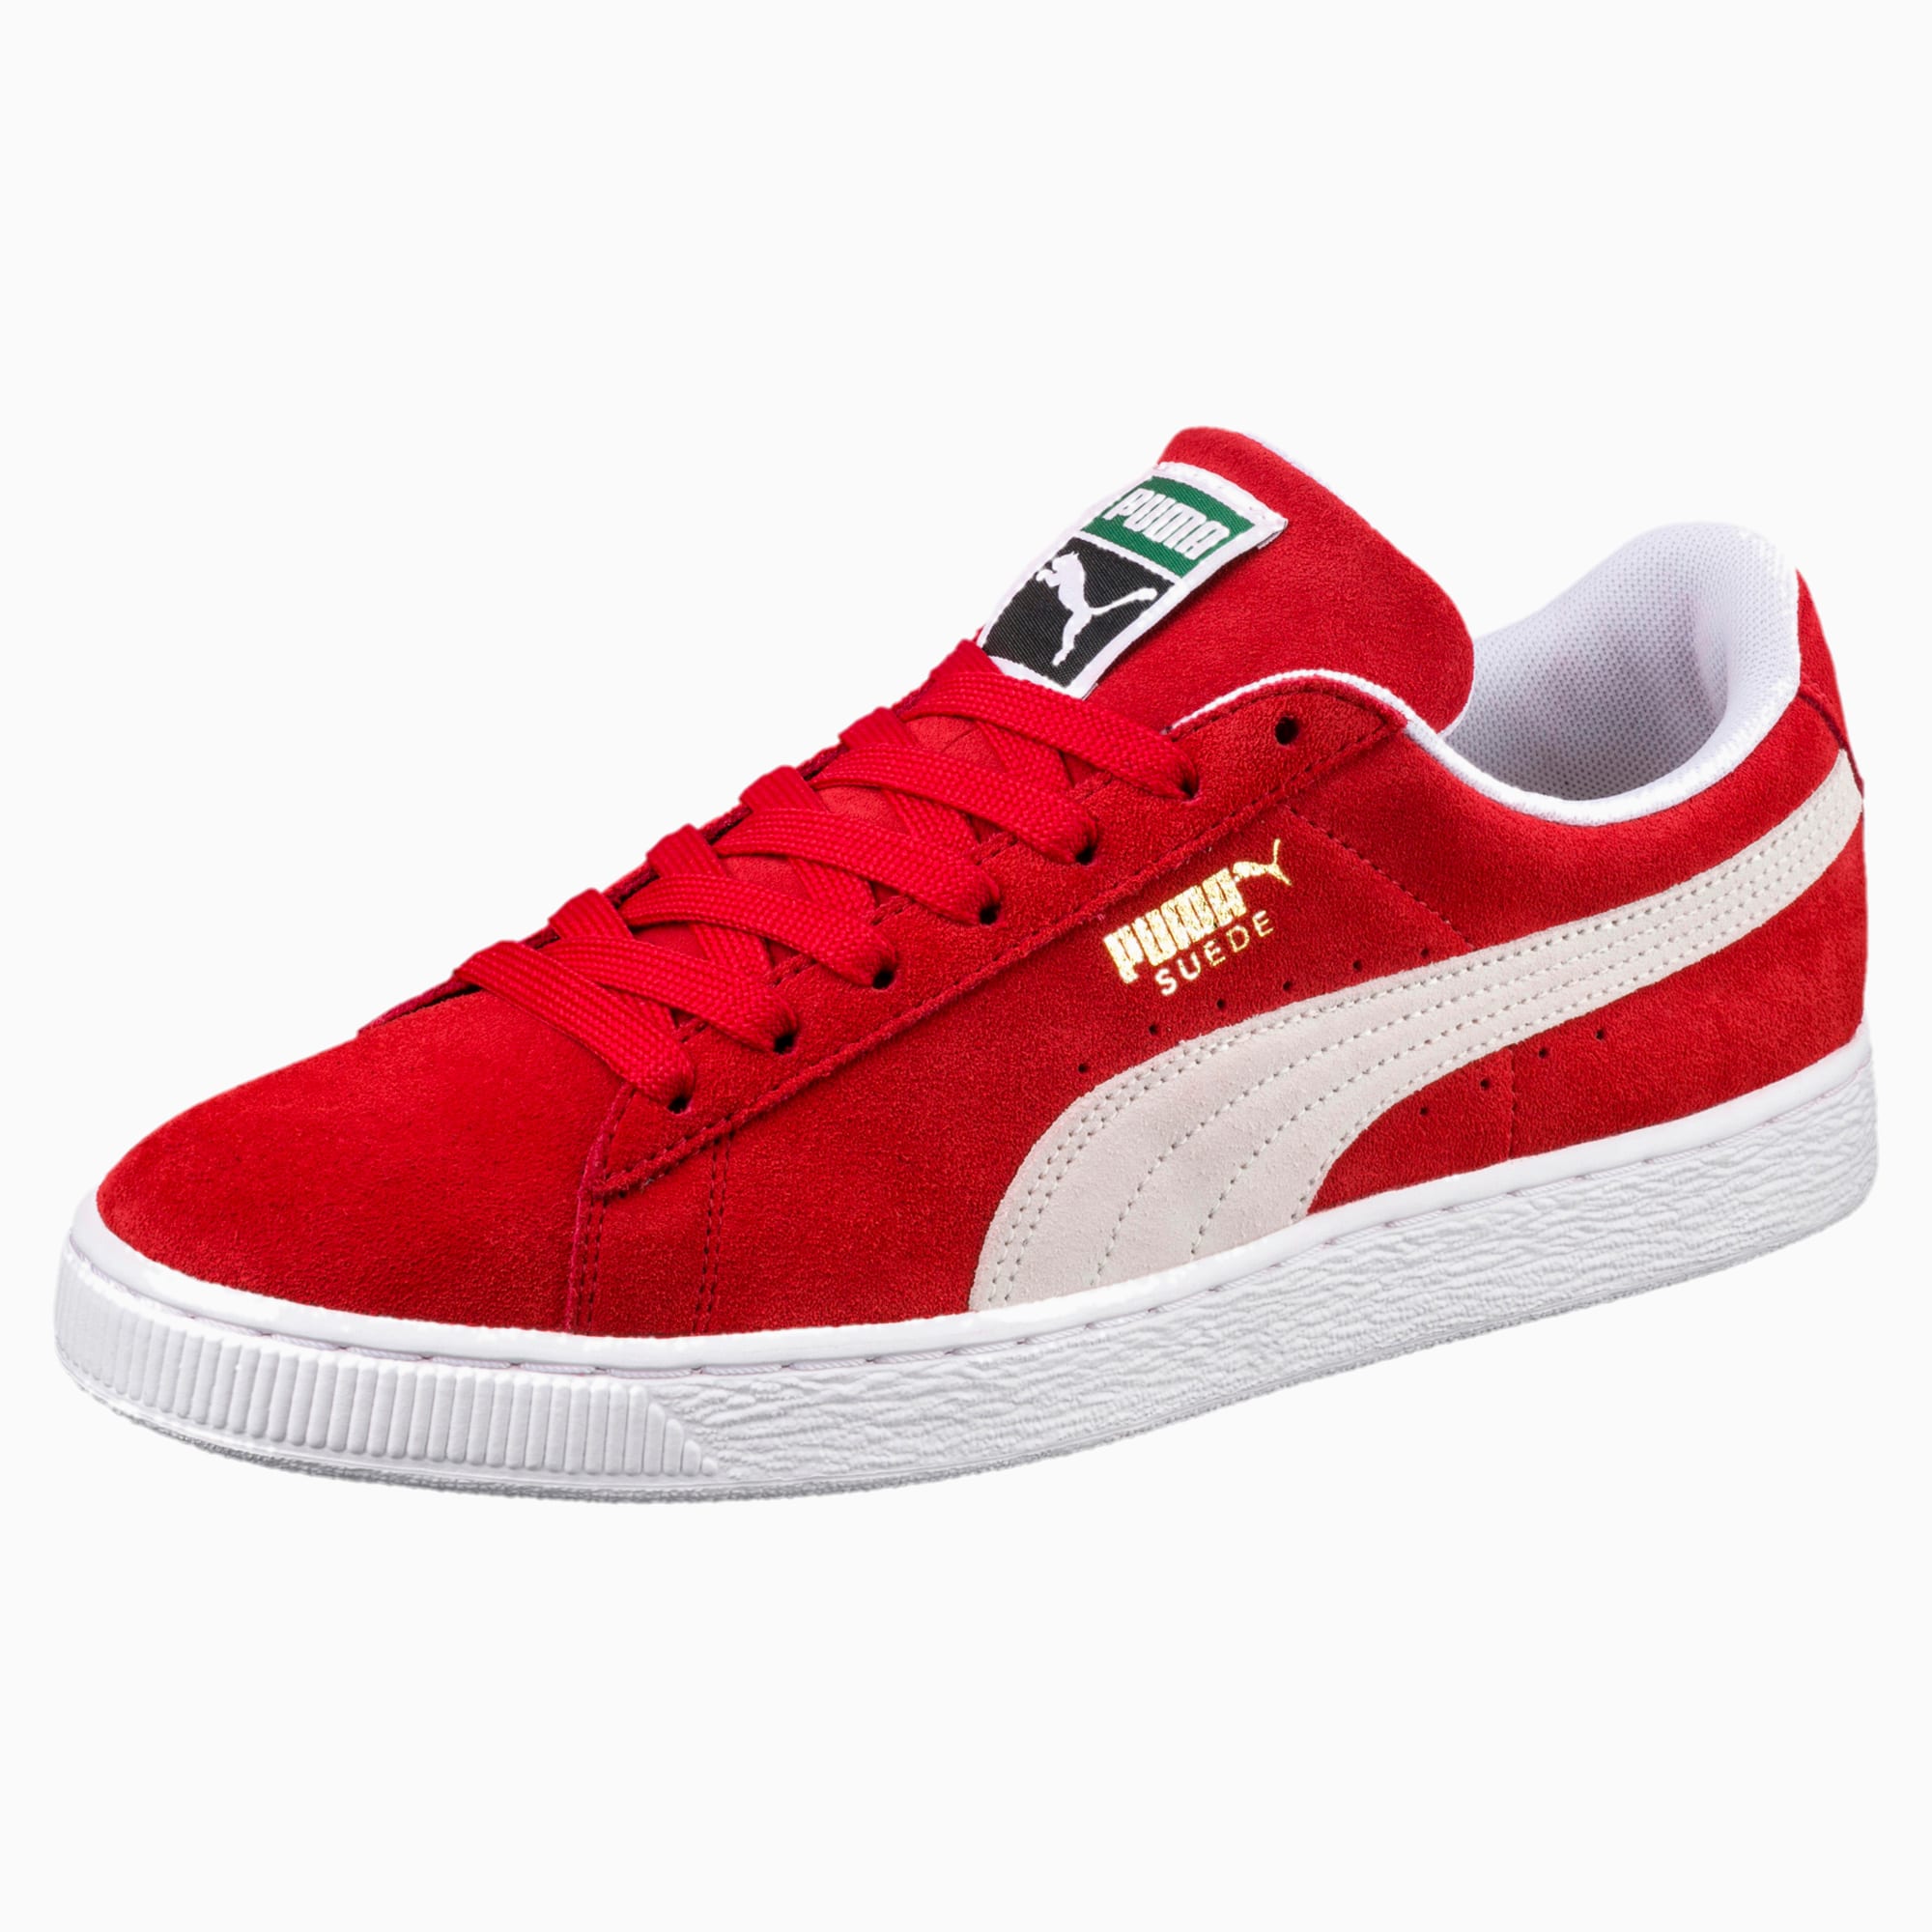 Puma Red Shoes Images | vlr.eng.br